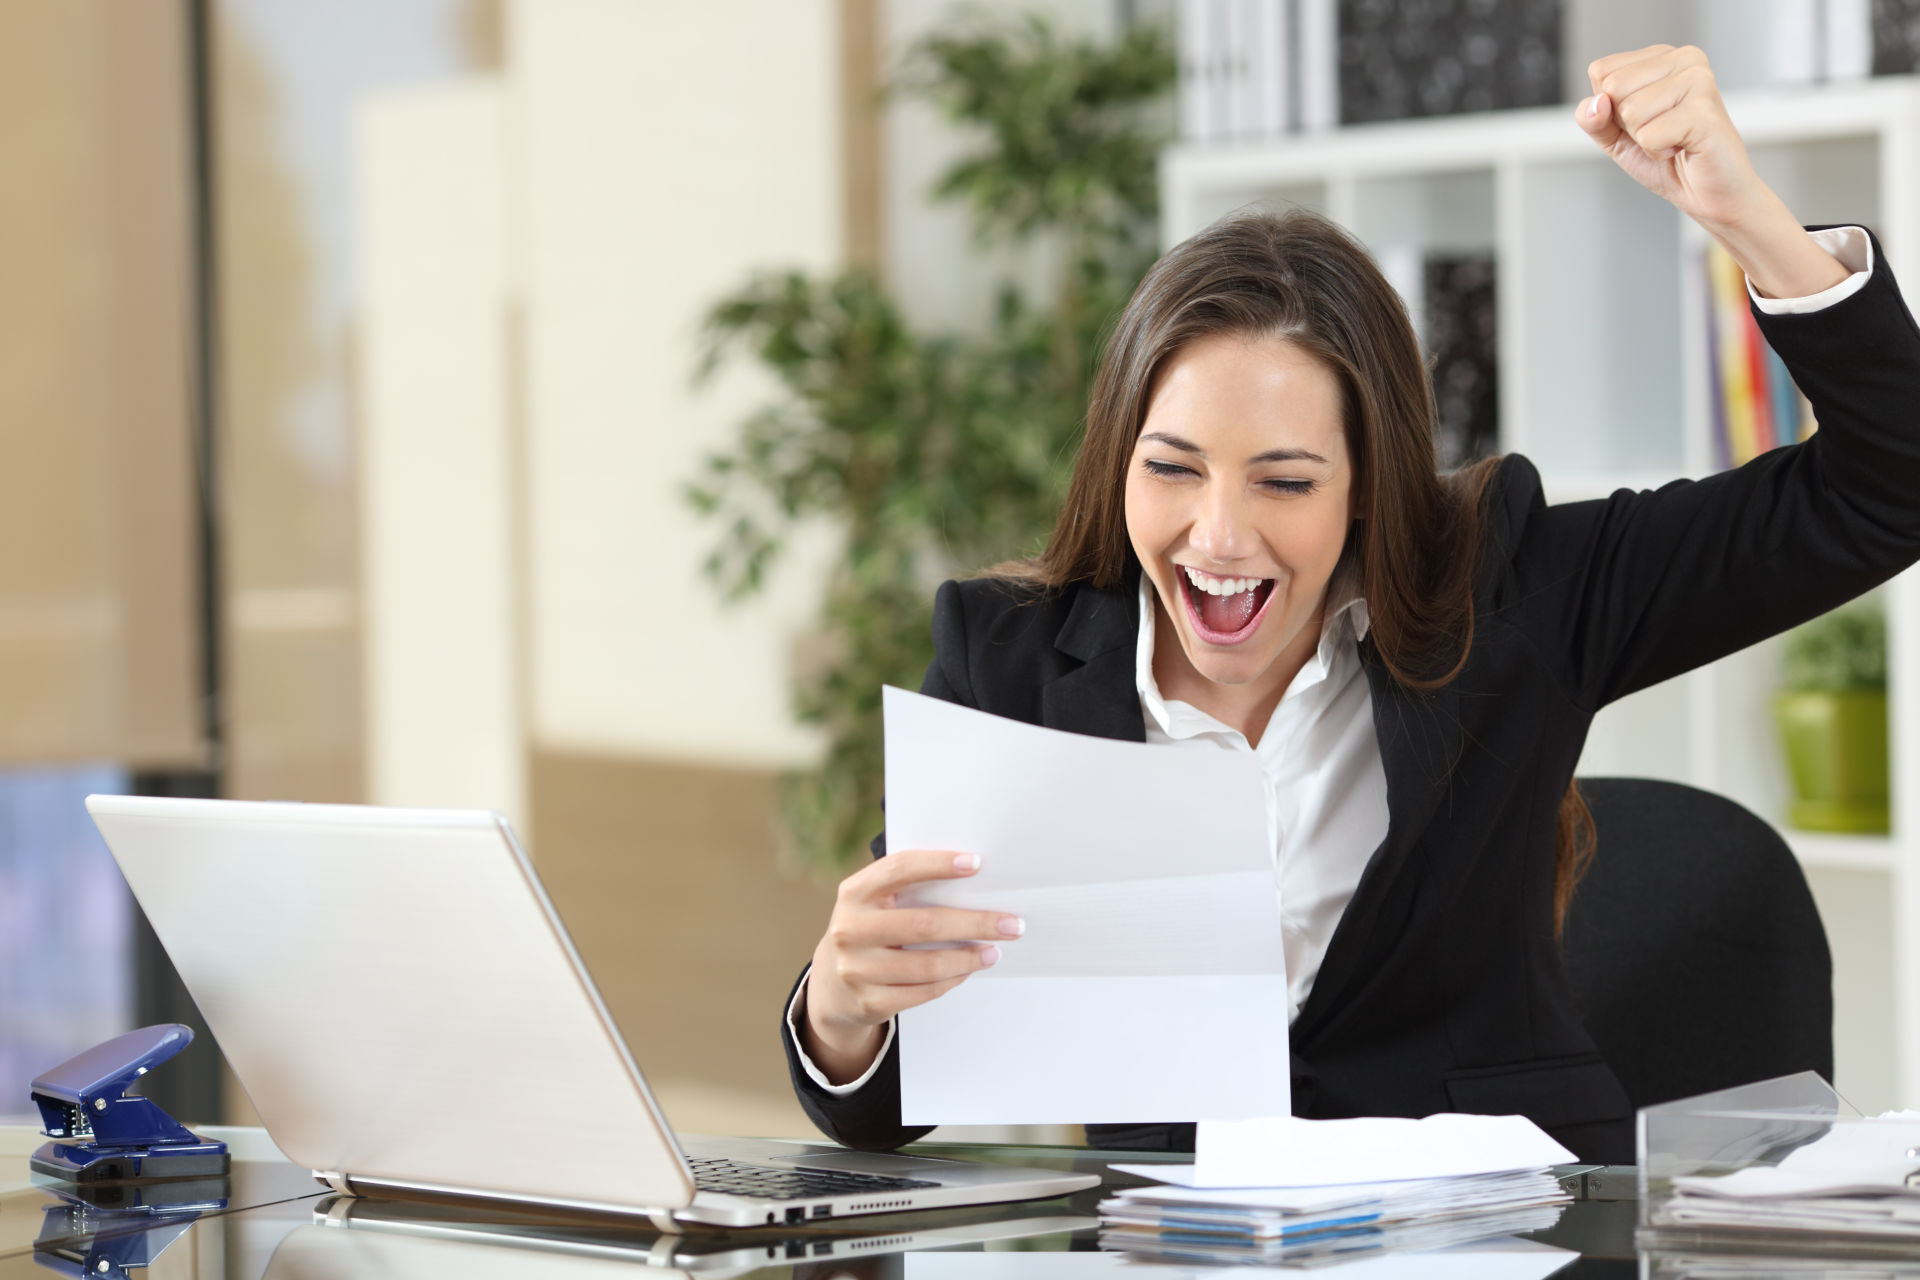 A young woman is in her office feeling excited to secure her finances with a personal line of credit.